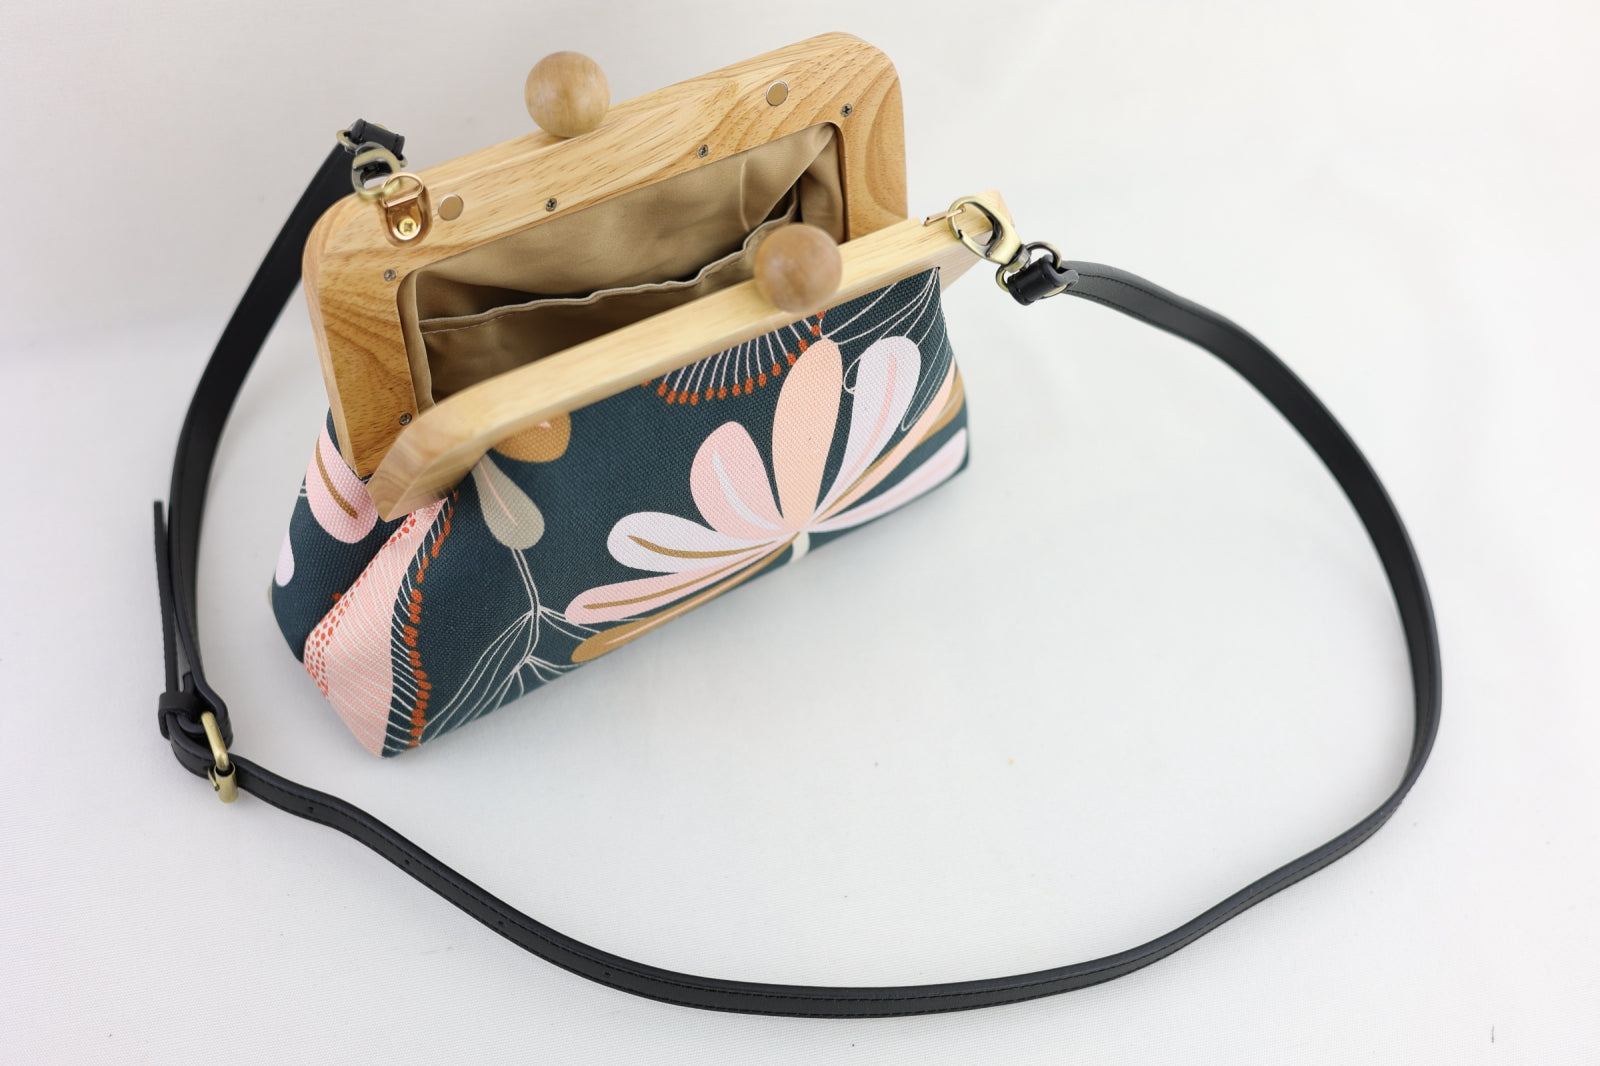 Banksia Floral Pattern Clutch with Leather Strap | PINKOASIS